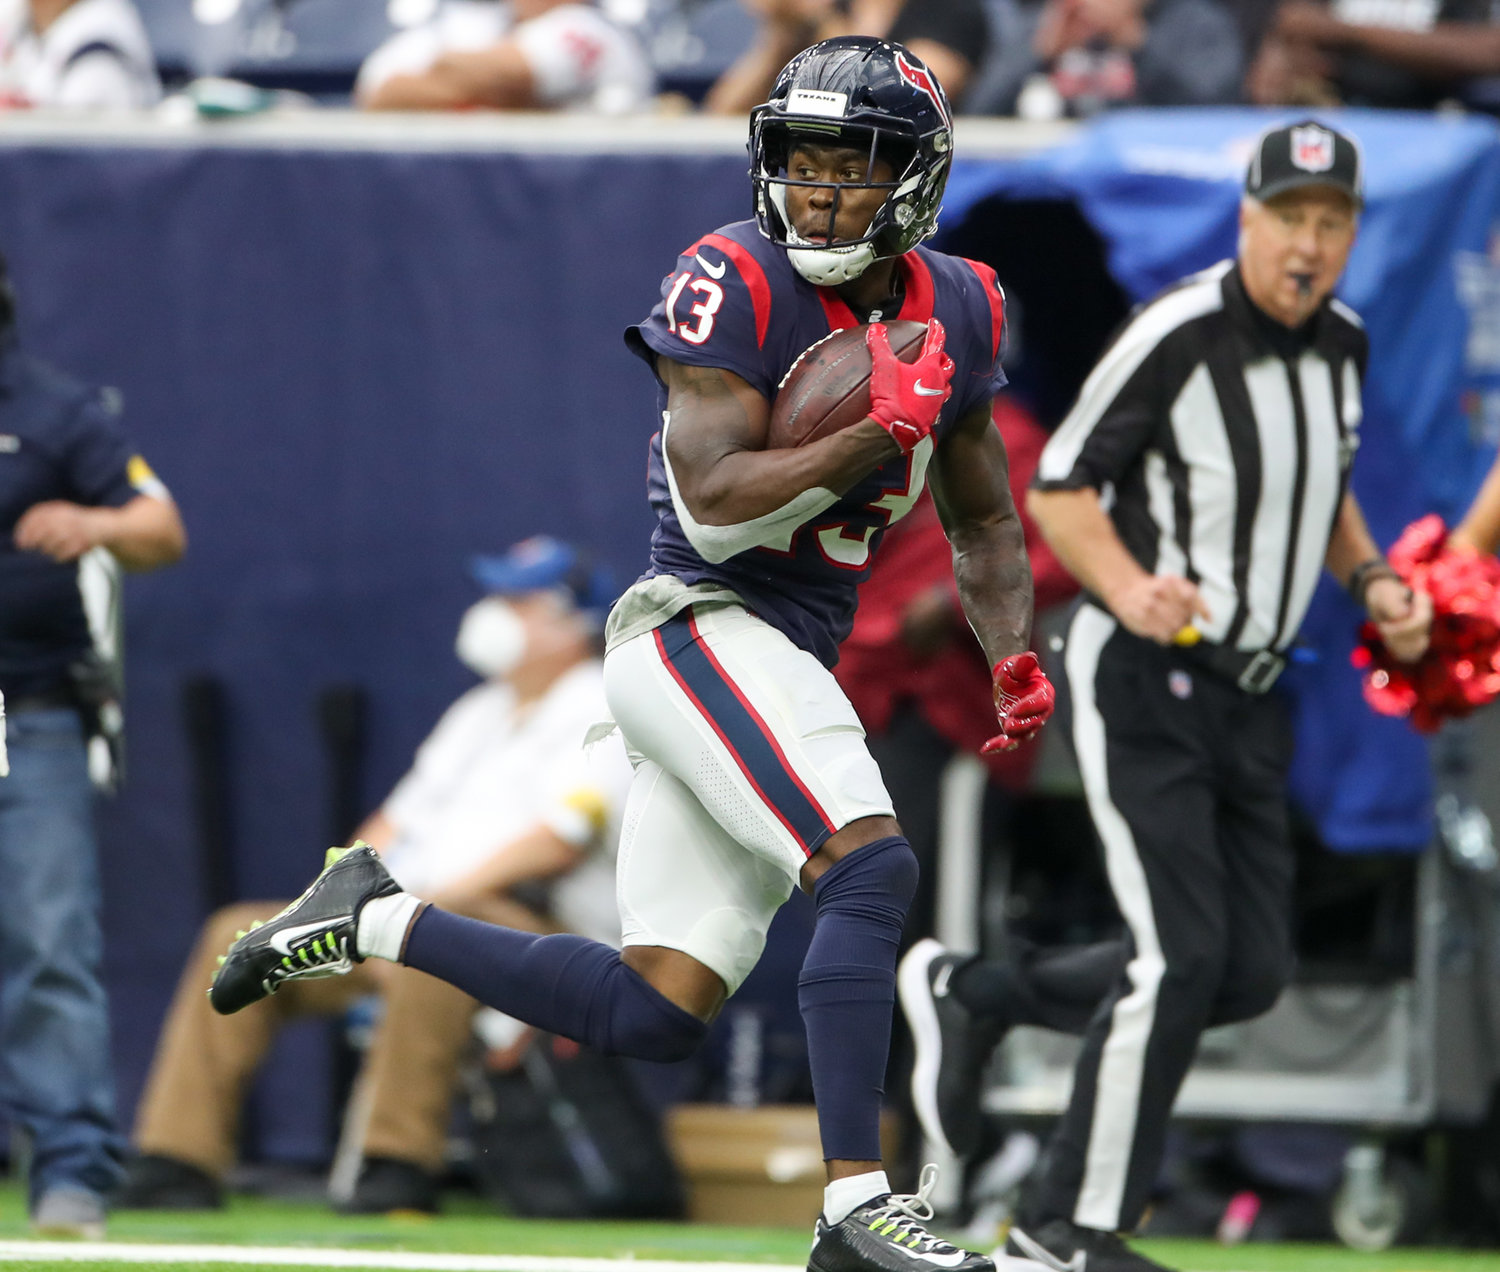 Houston Texans wide receiver Brandin Cooks (13) carries the ball on a 45-yard touchdown reception during an NFL game between Houston and the Los Angeles Rams on October 31, 2021 in Houston, Texas.